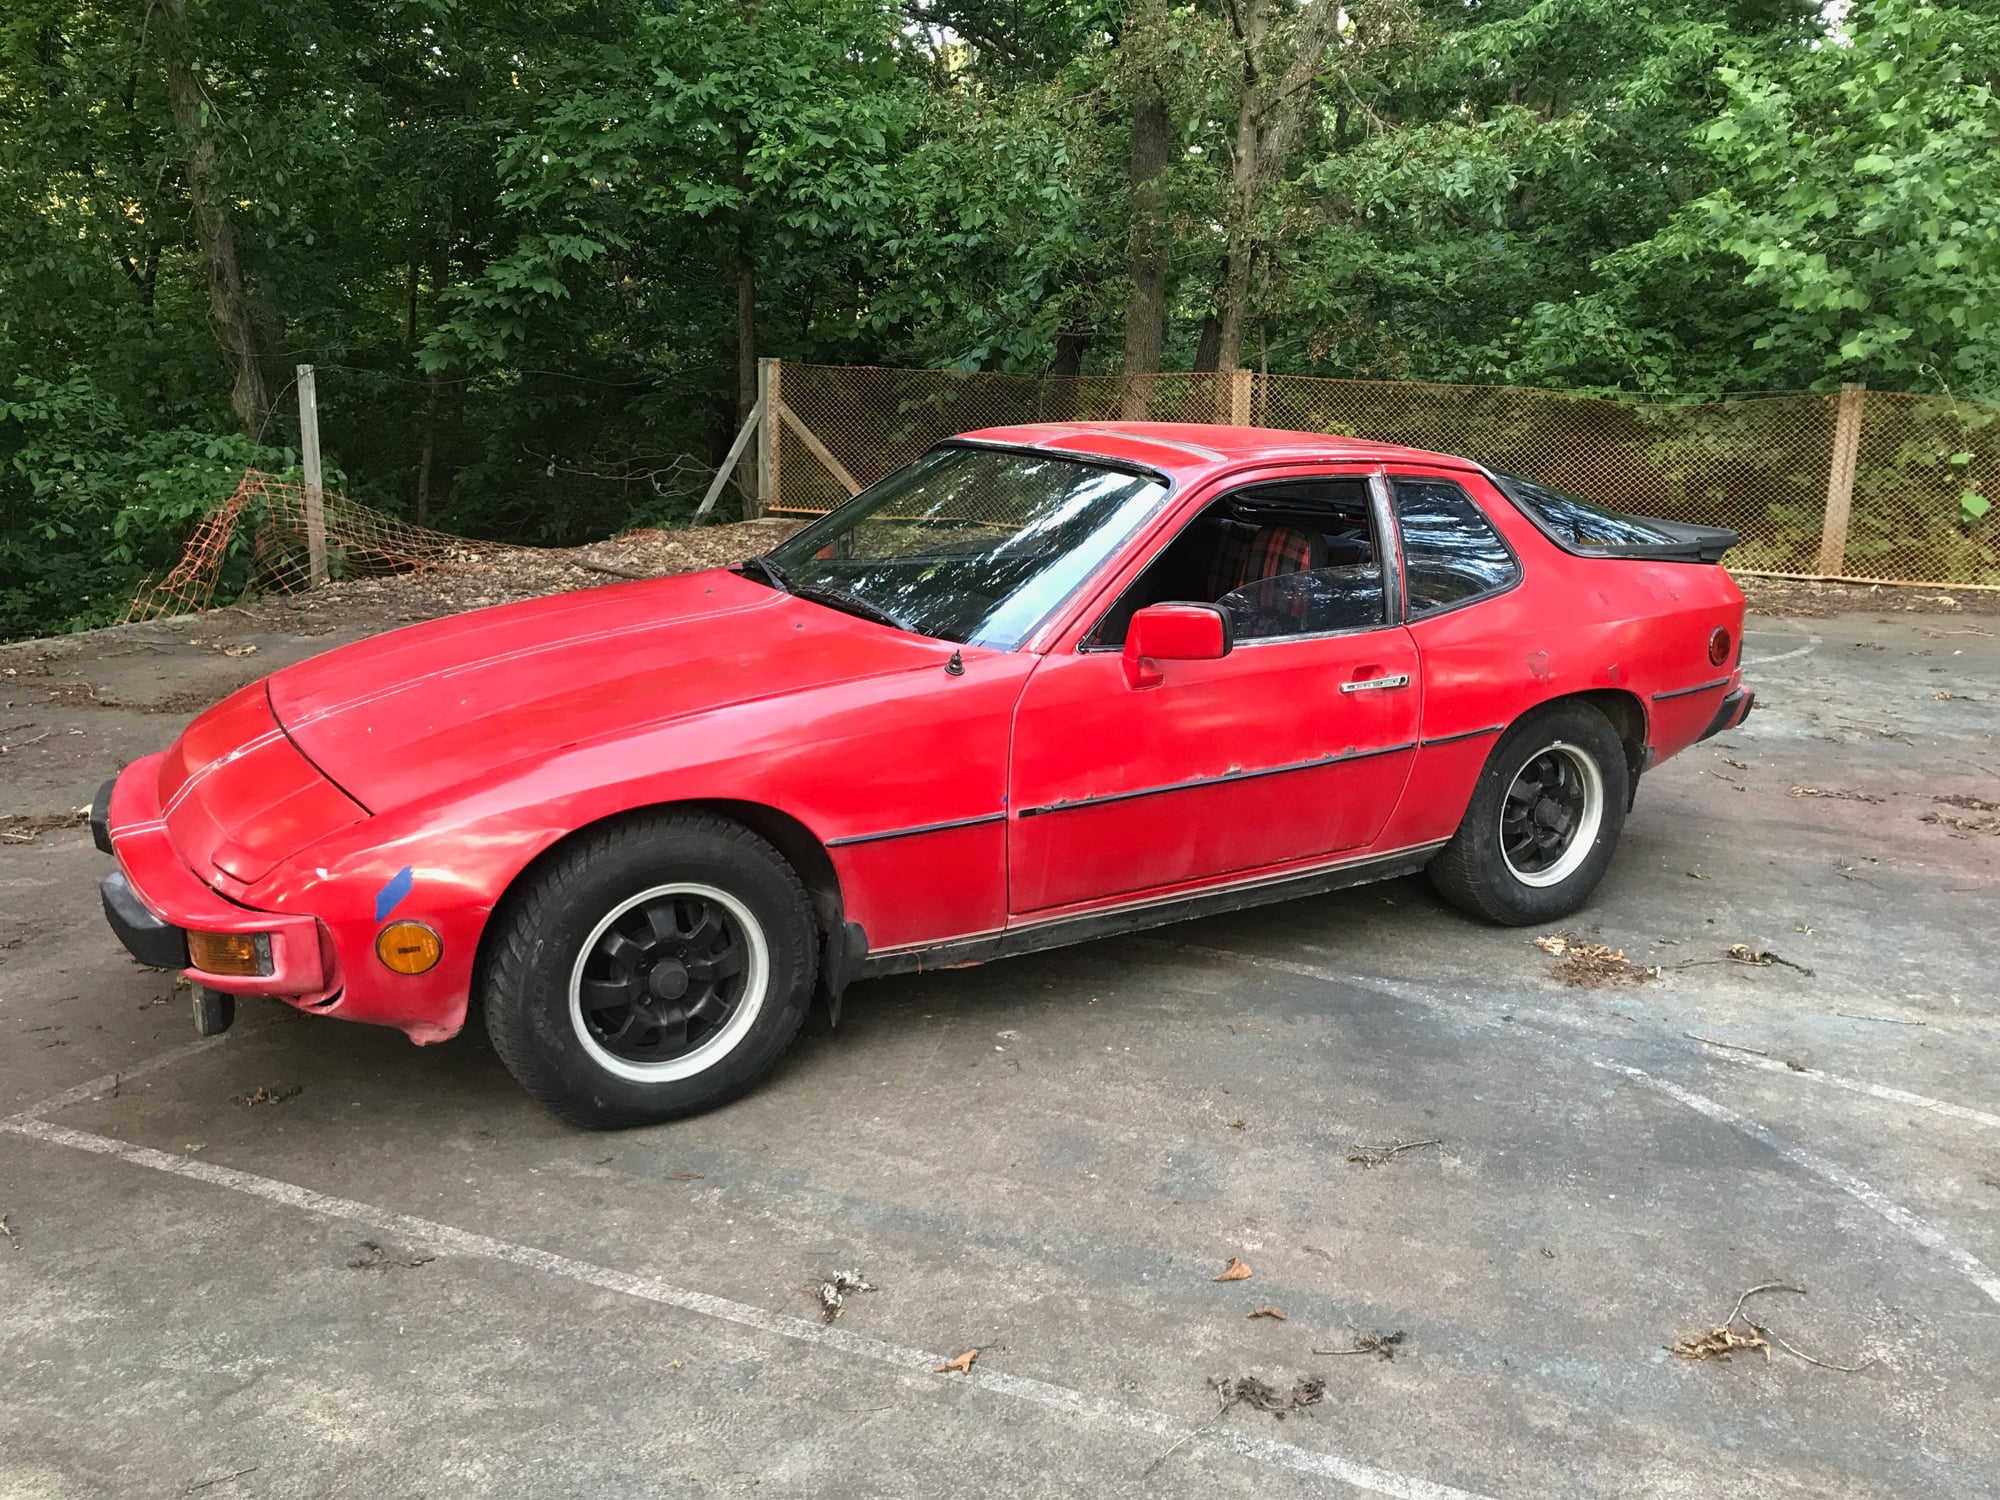 1979 Porsche 924 - 79 Porsche 924 Sebring - Used - VIN 9249206944 - 127,141 Miles - 4 cyl - 2WD - Manual - Coupe - Red - Rogers, AR 72756, United States